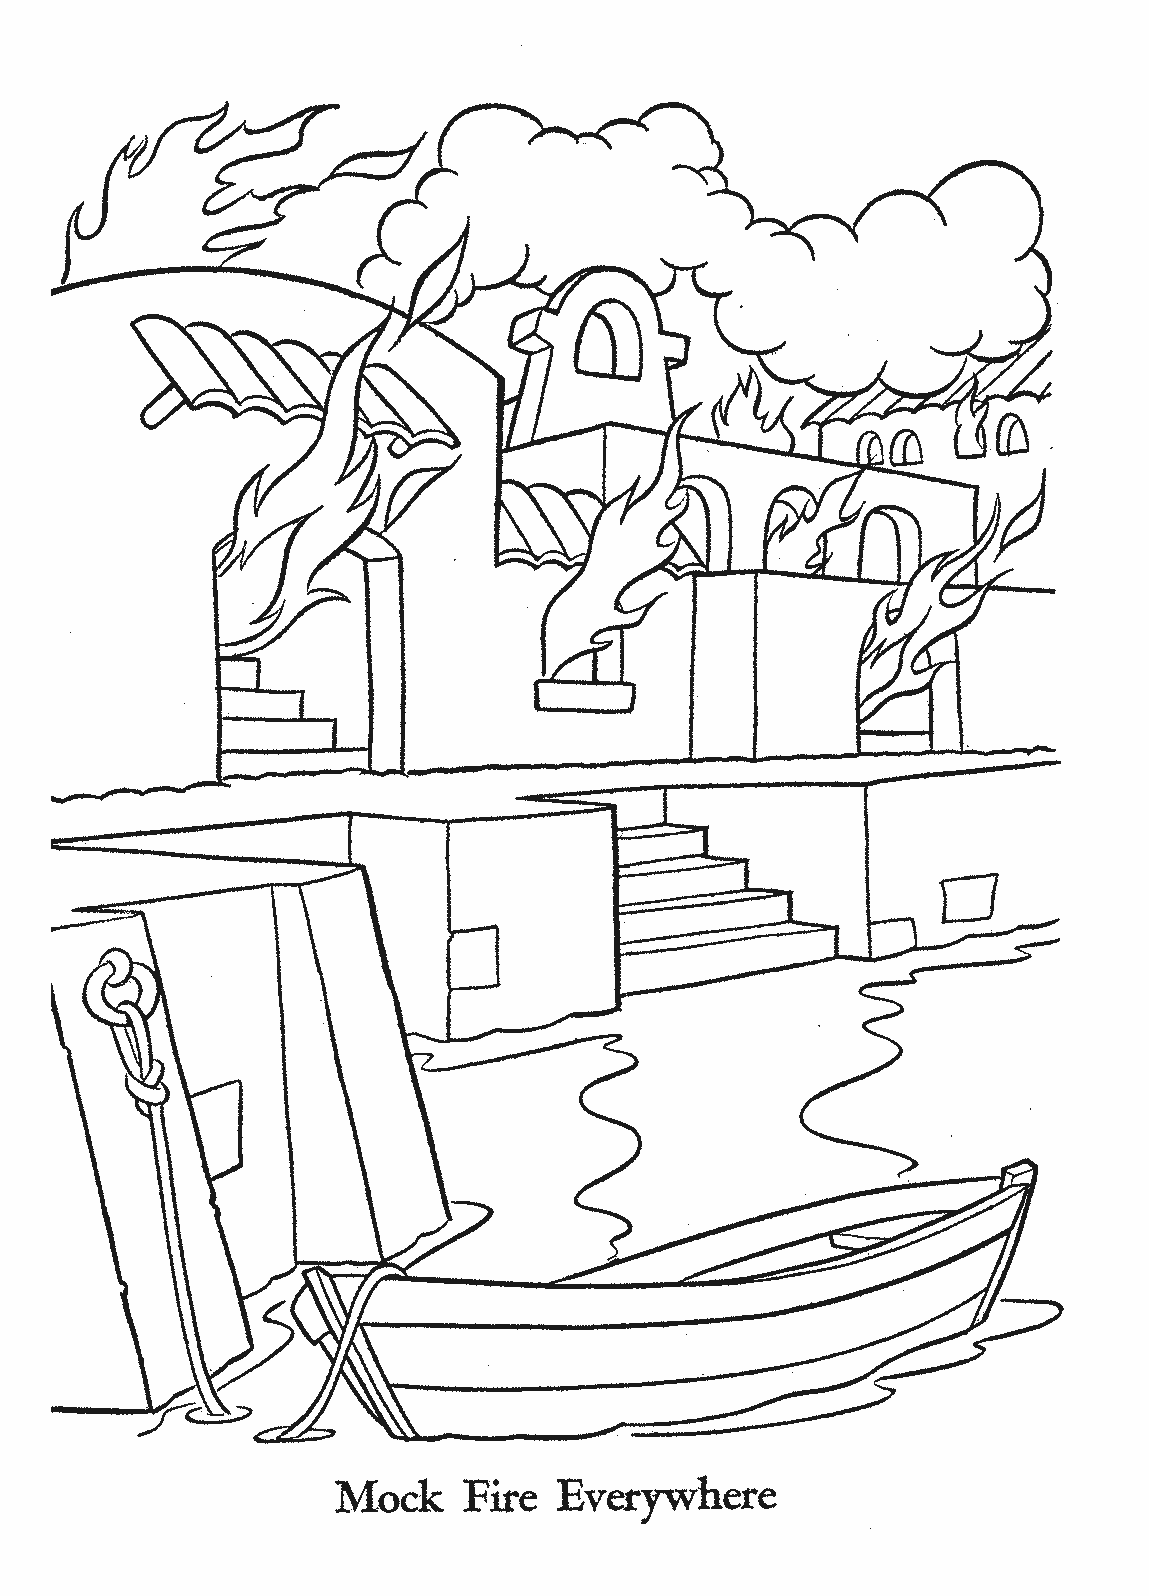 Disneyland Rides Coloring Pages - High Quality Coloring Pages